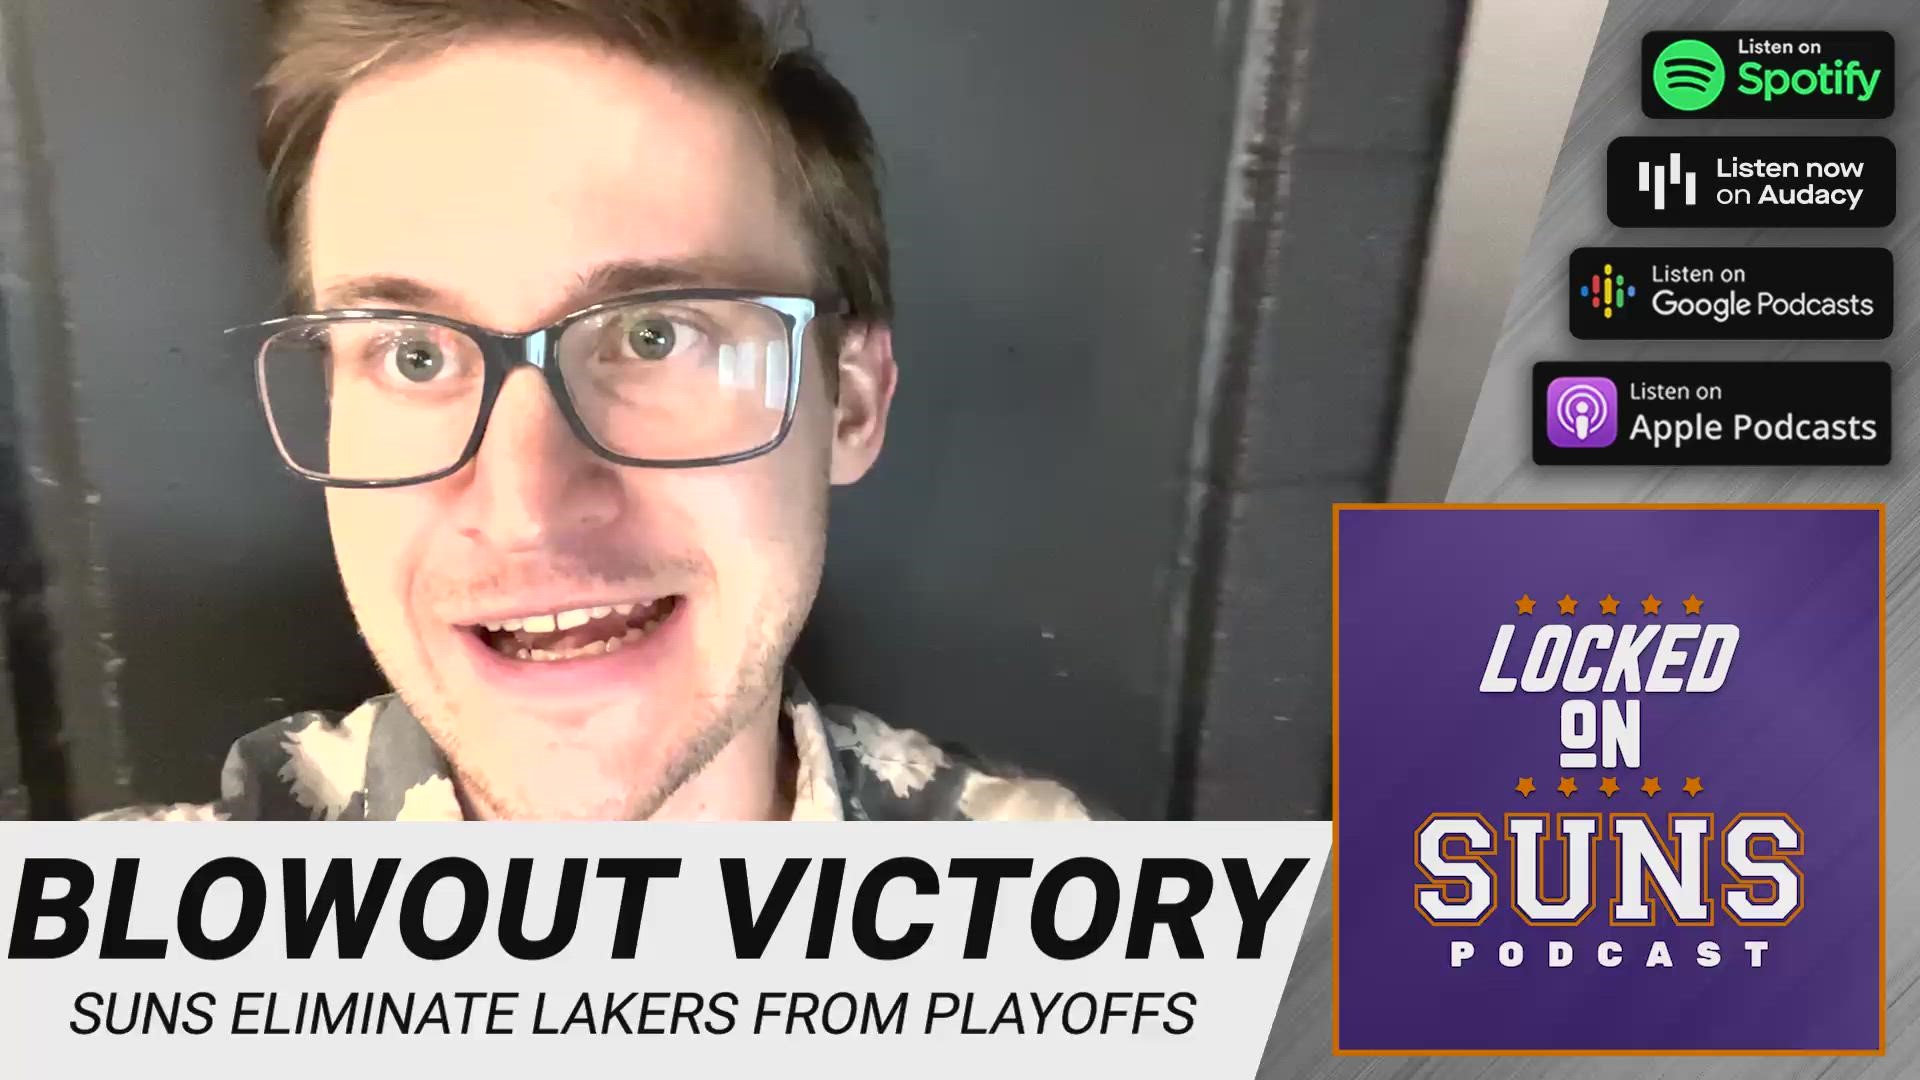 The Phoenix Suns won their franchise-record 63rd win over the Los Angeles Lakers Tuesday. The victory also eliminated the Lakers from playoff contention.